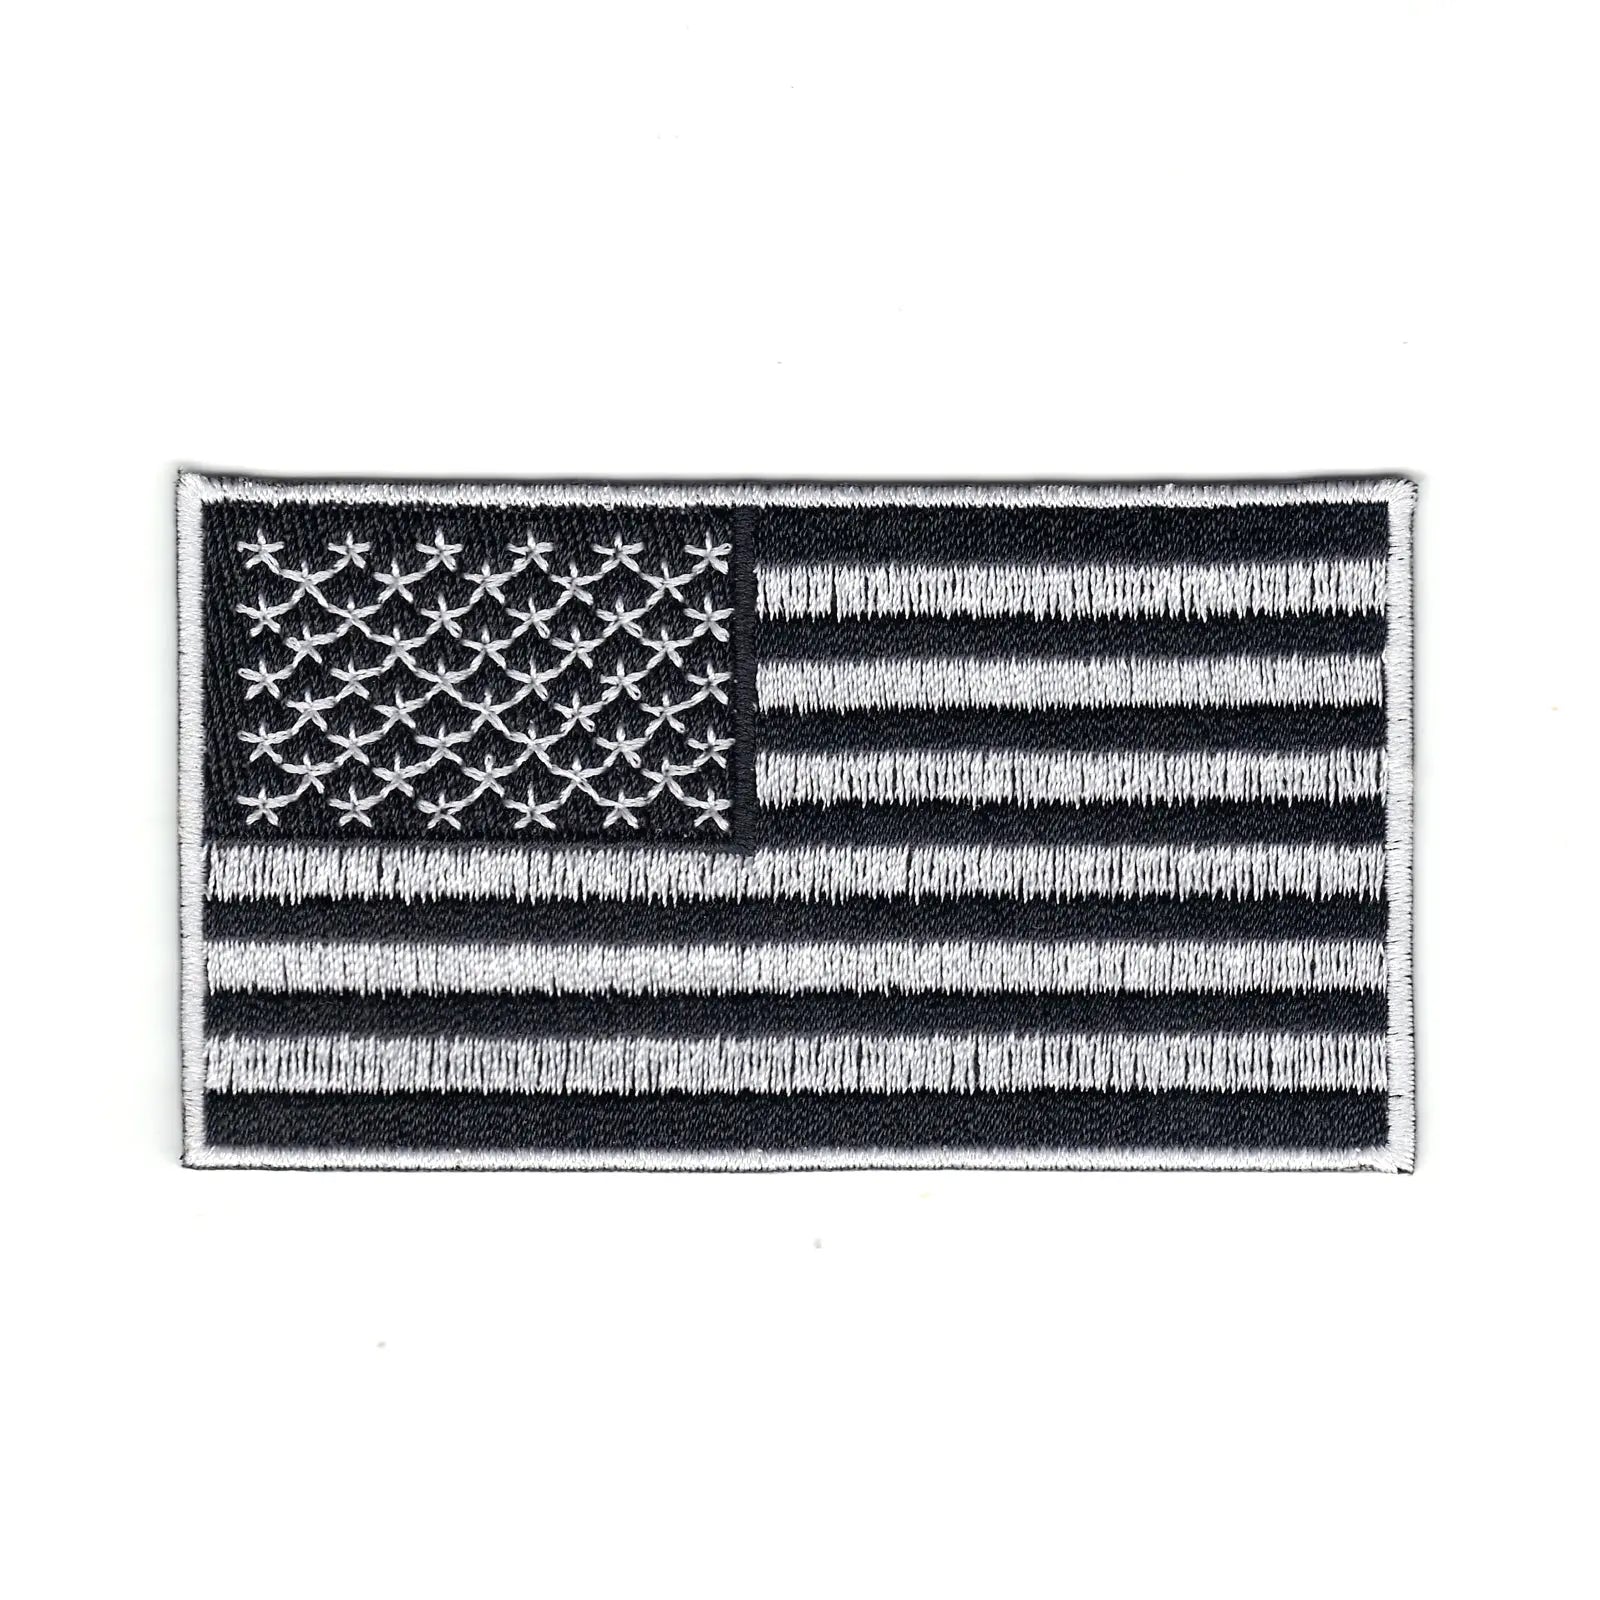 United States of America USA Embroidered Army Flag Tactical Patch Black and White 